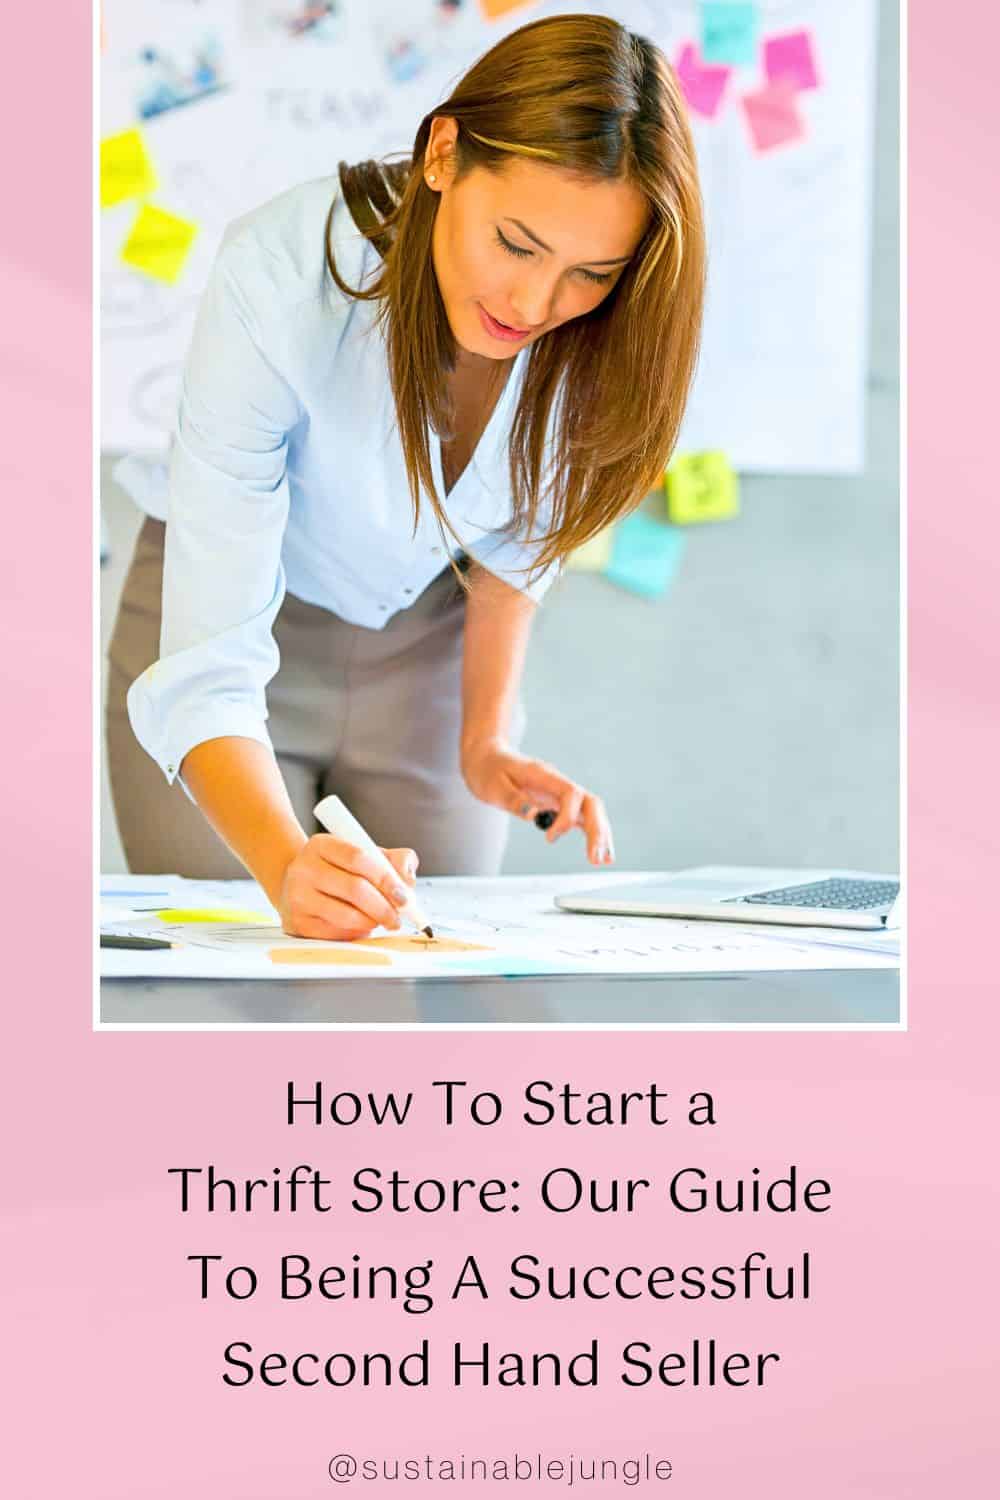 How To Start a Thrift Store: Our Guide To Being A Successful Second Hand Seller Image by andresr #howtostartathriftstore #howtoopenathriftstore #thriftingbusiness #startingathriftstore #owningathriftstore #sustainablejungle